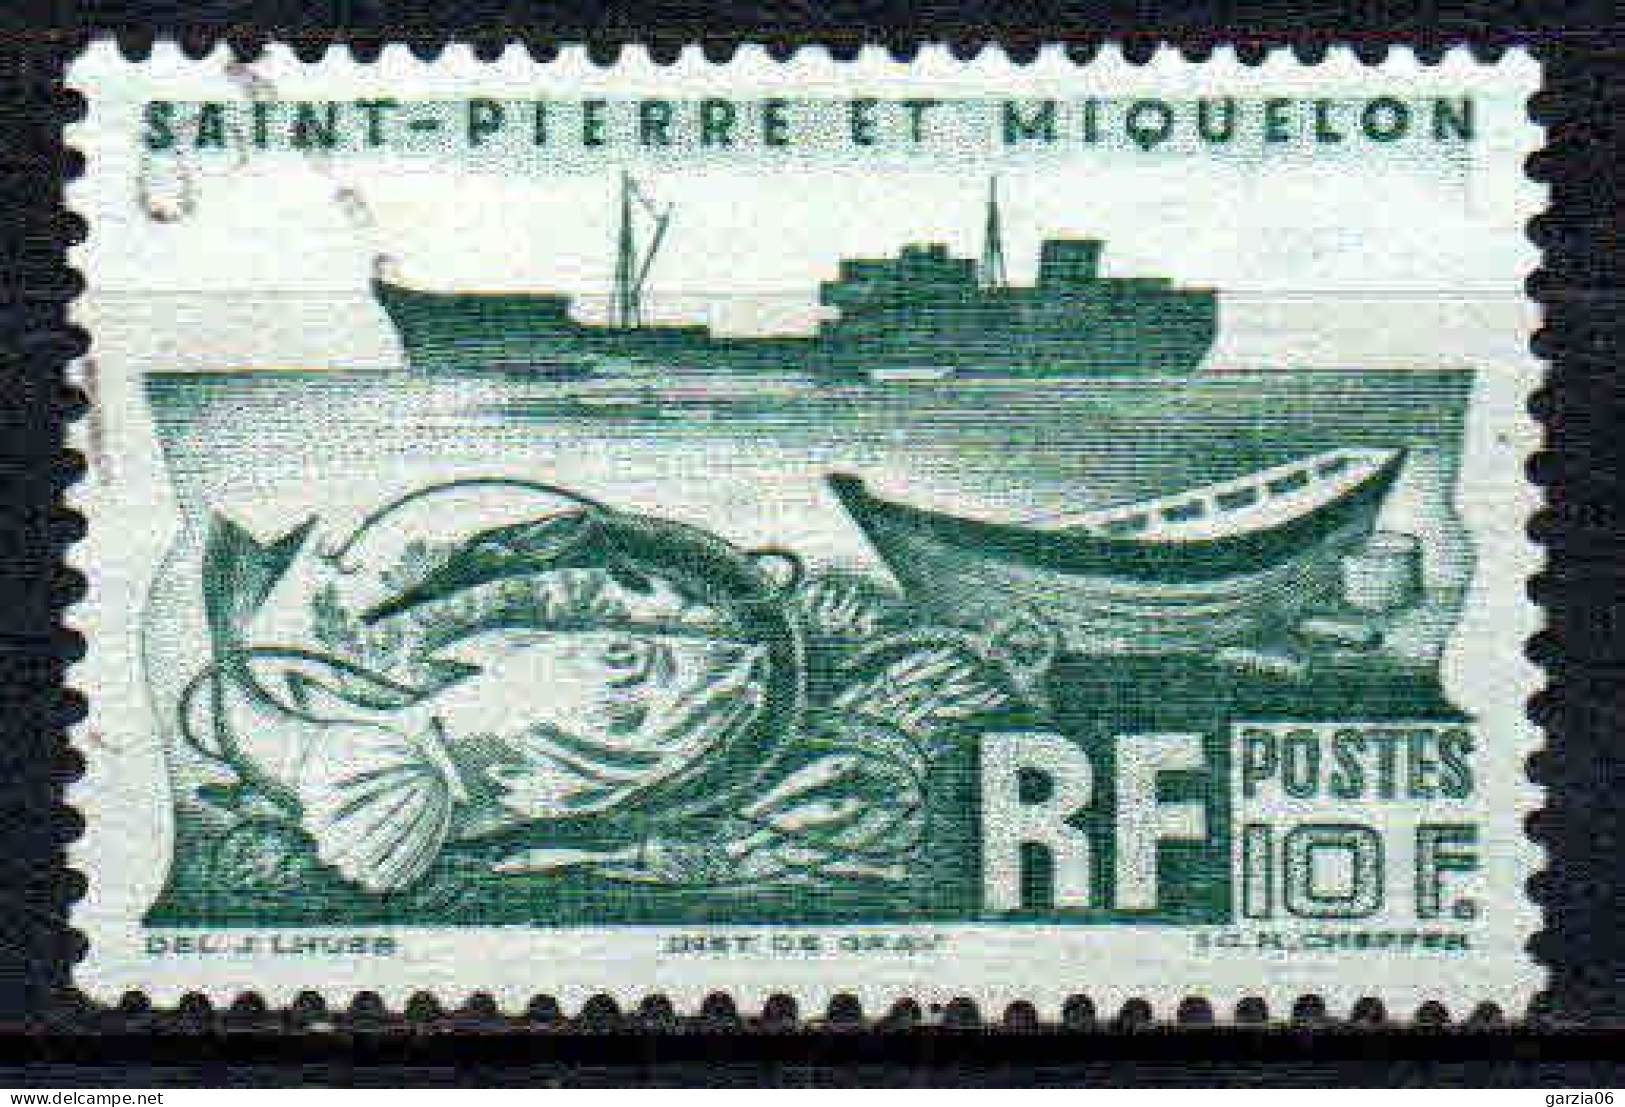 St Pierre Et Miquelon  - 1947 -  Chalutier  - N° 340  - Oblit - Used - Used Stamps